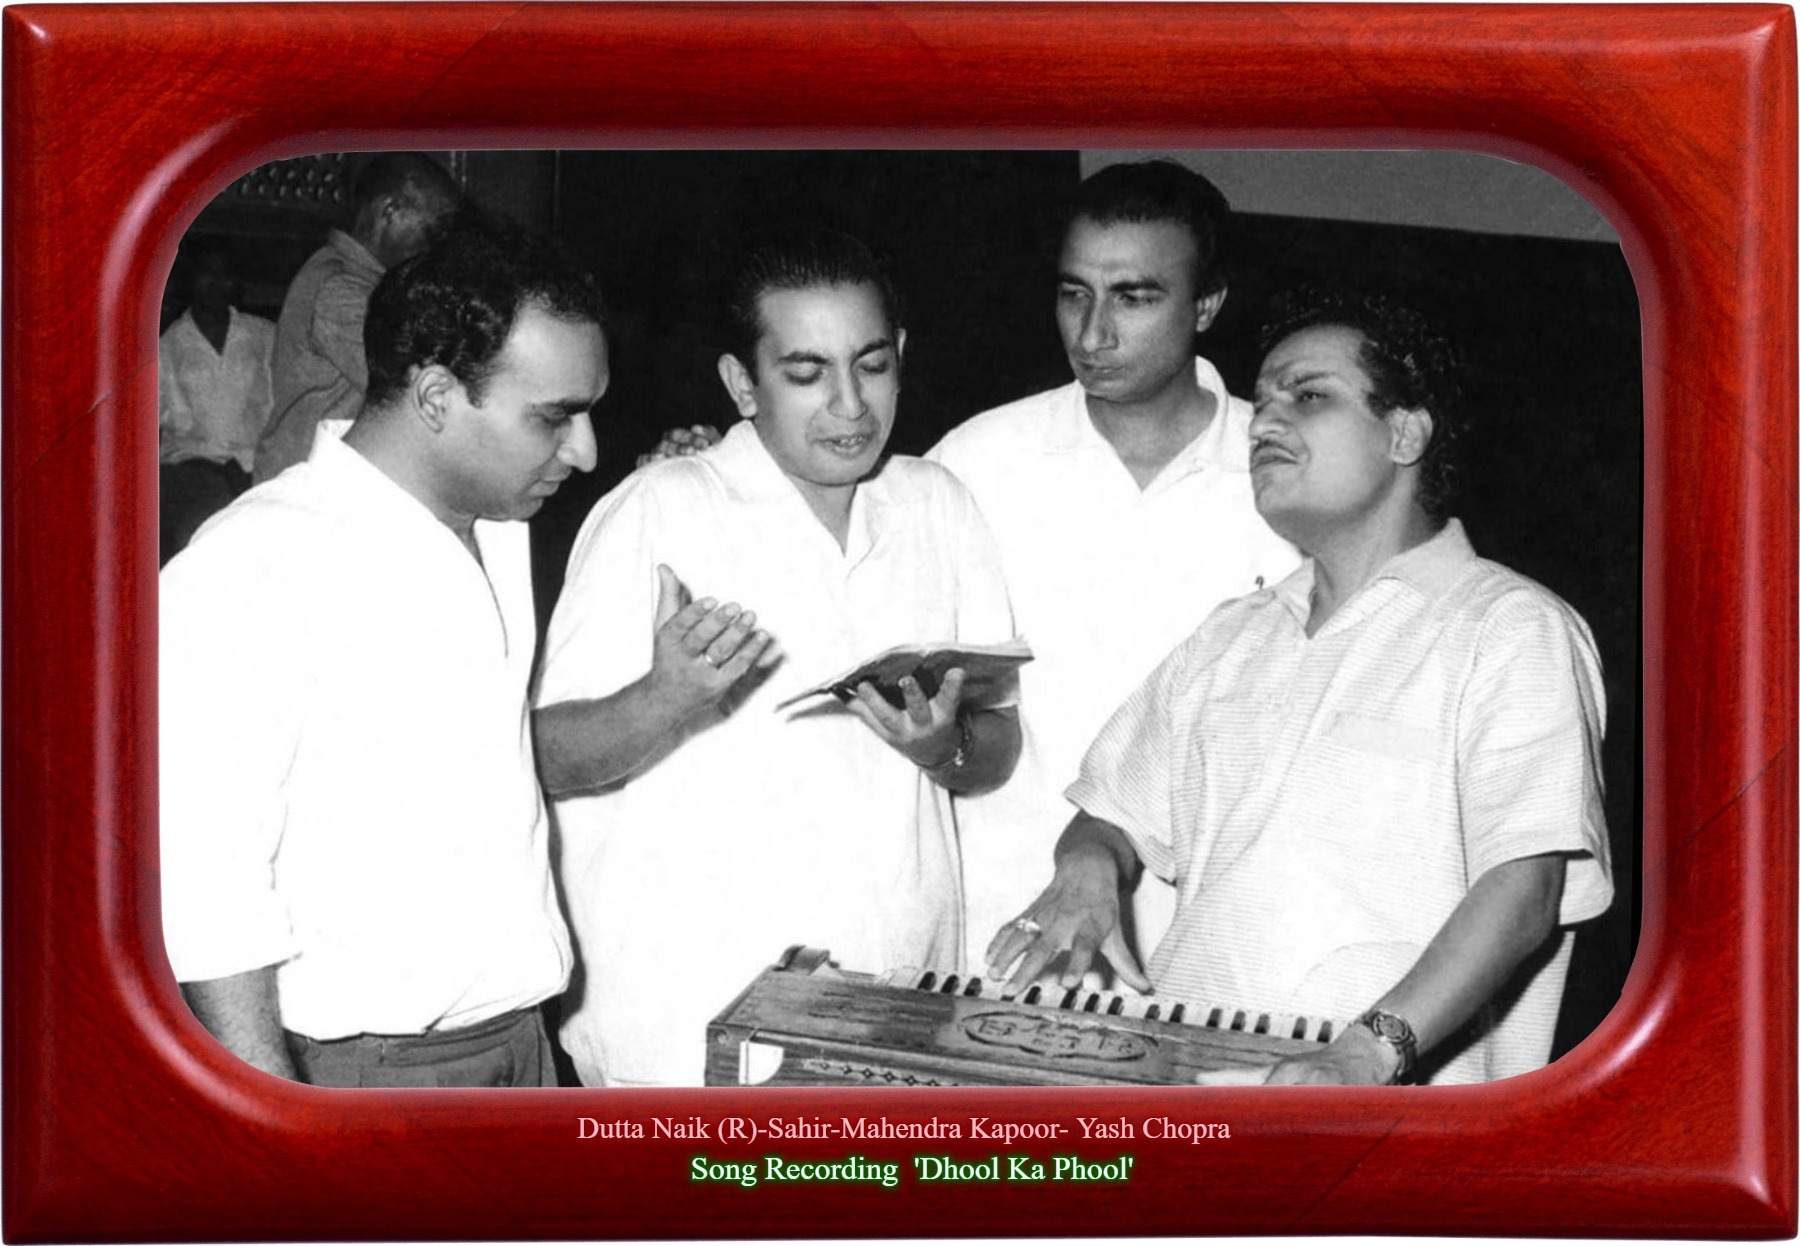 Read more about the article “Dutta Naik Composed Some Memorable Songs”